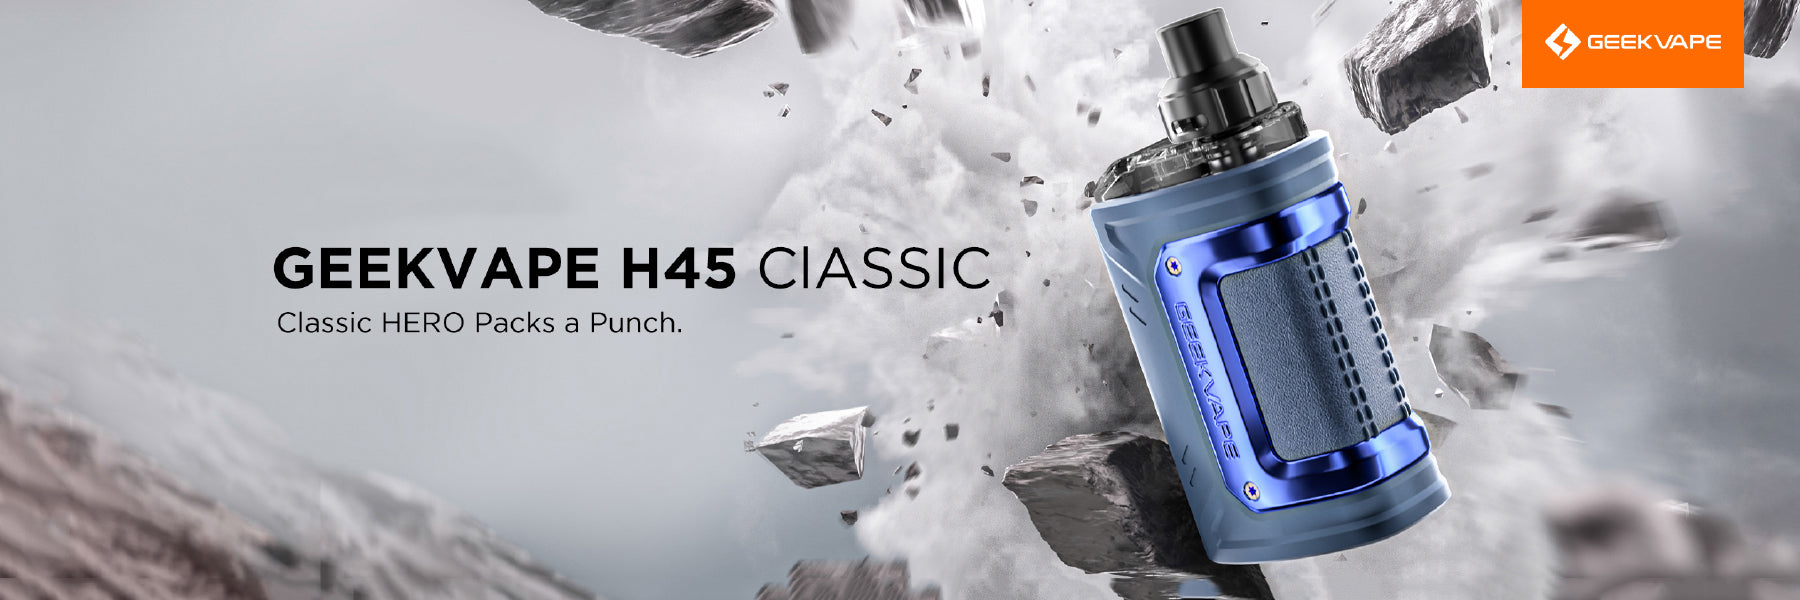 GEEKVAPE H45 CLASSIC KIT VS GEEKVAPE  H45 KIT：A Comprehensive Comparison of Features and Performance